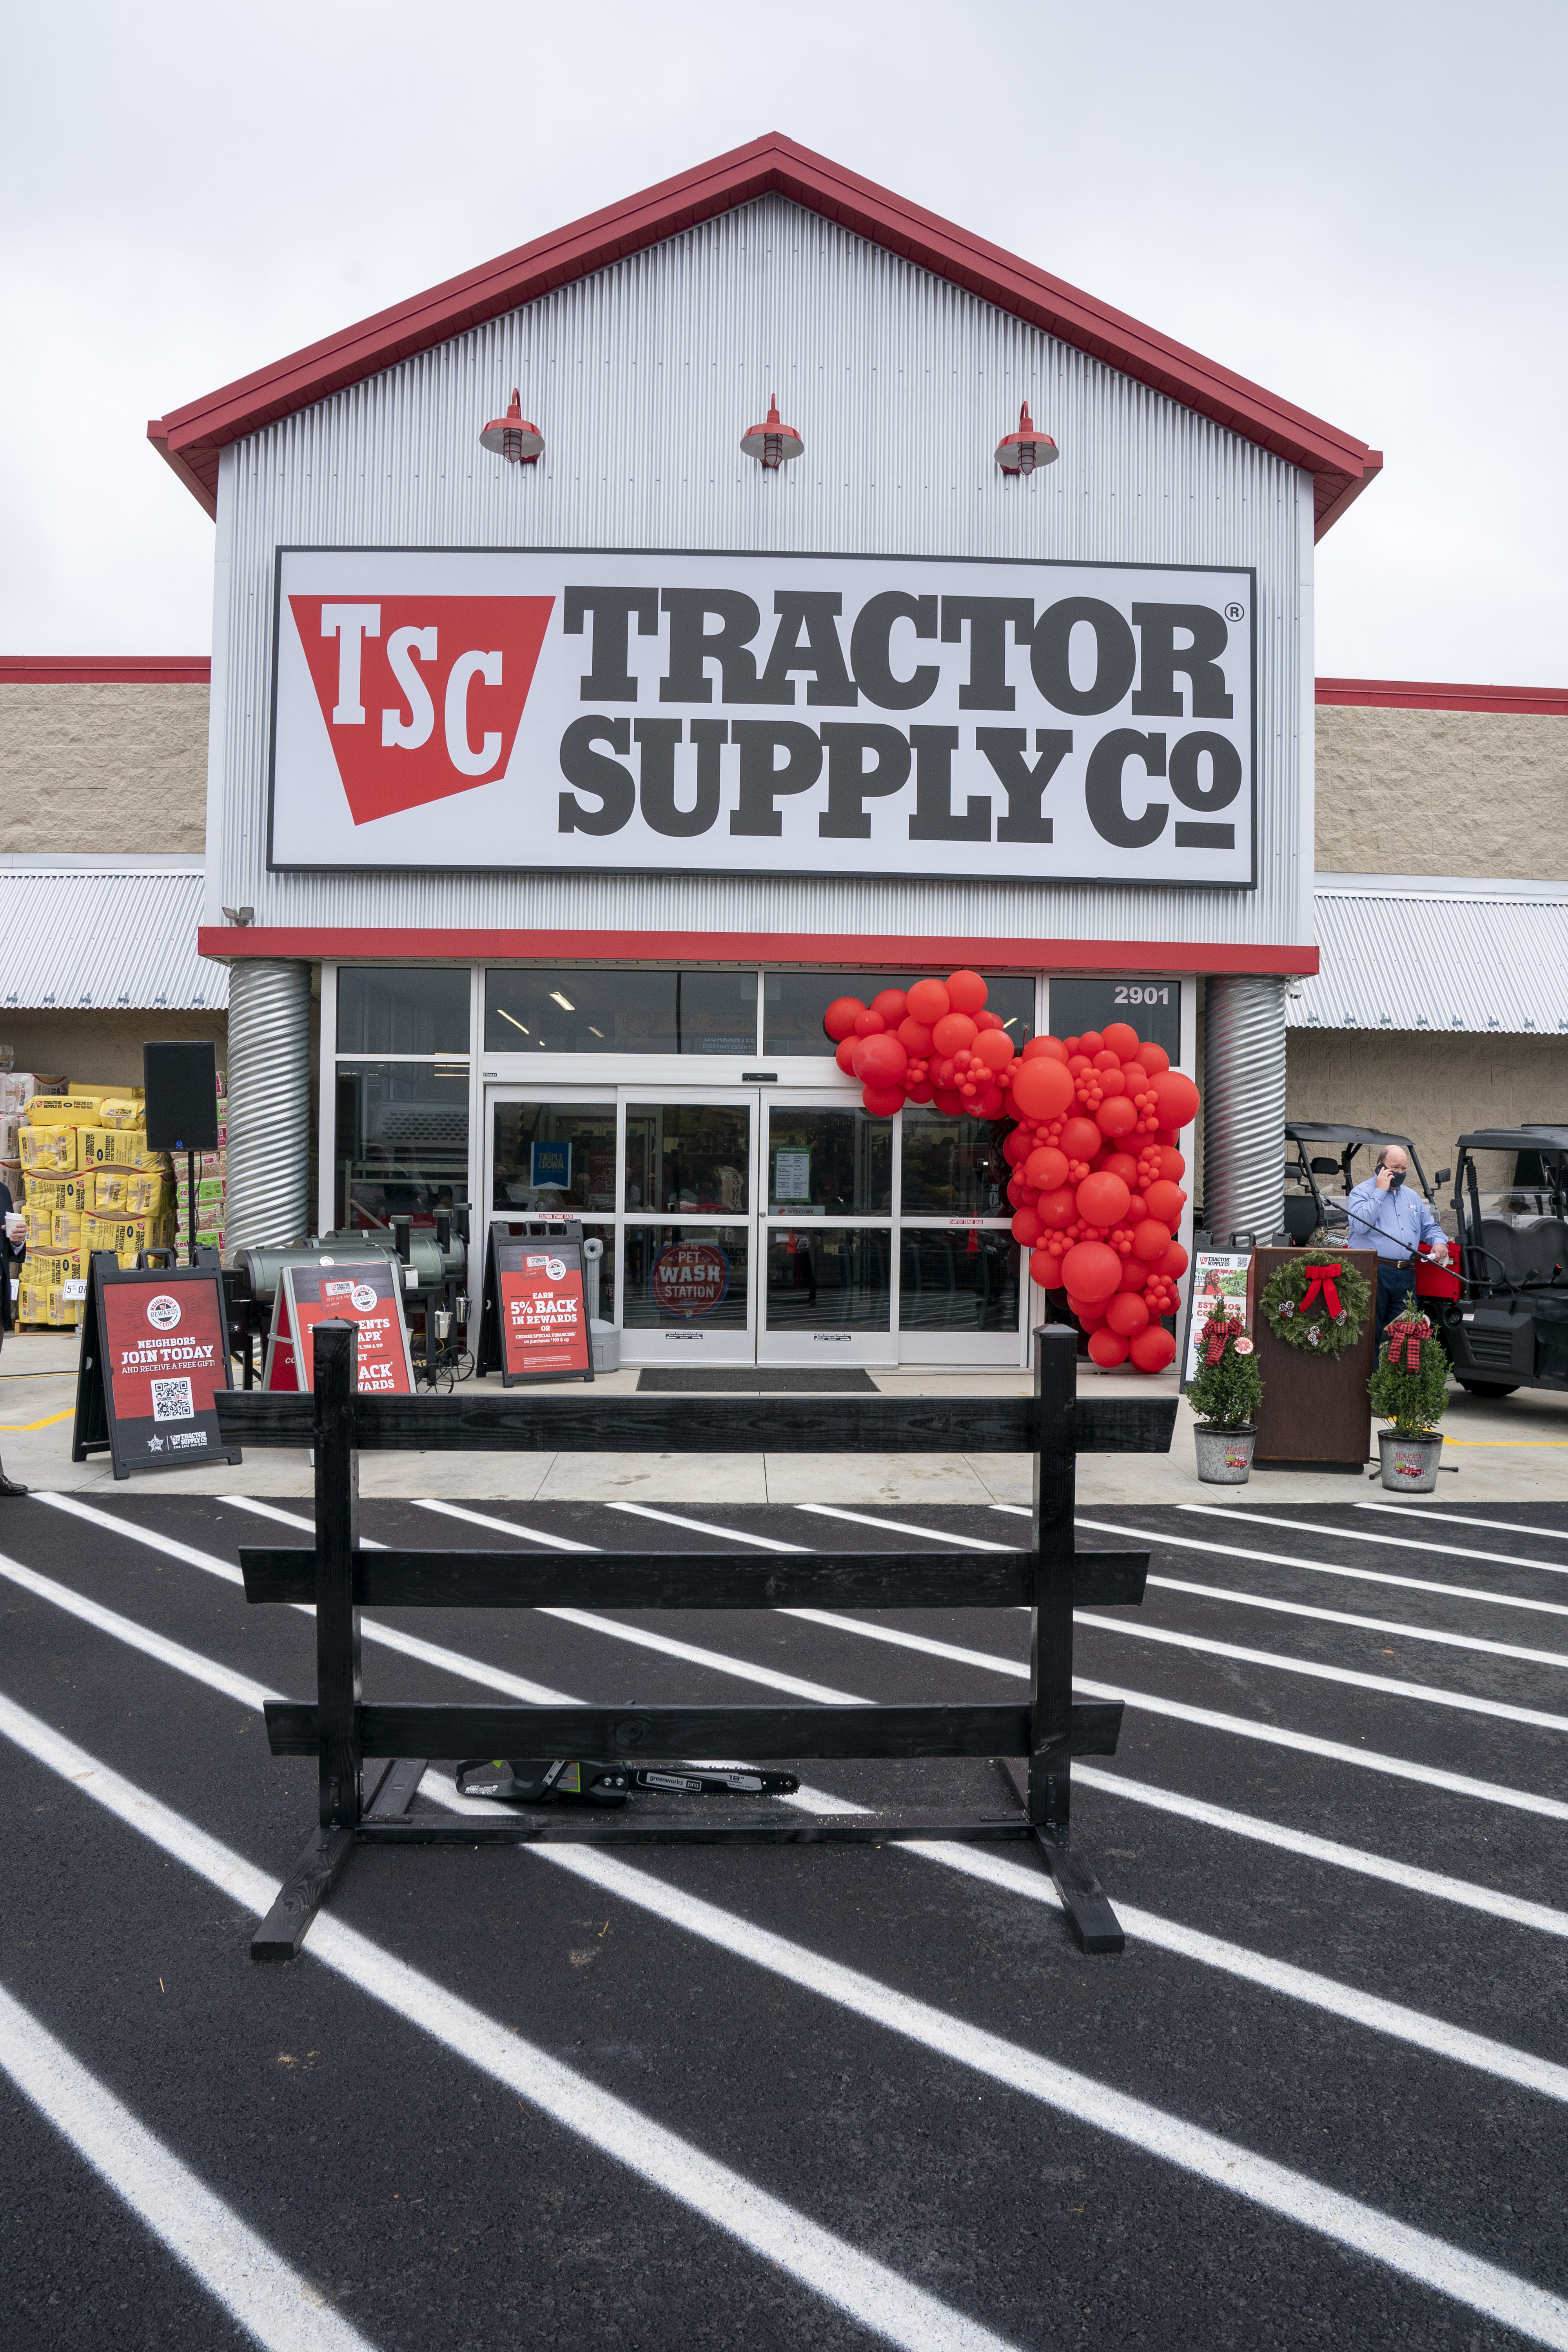 tractor supply co